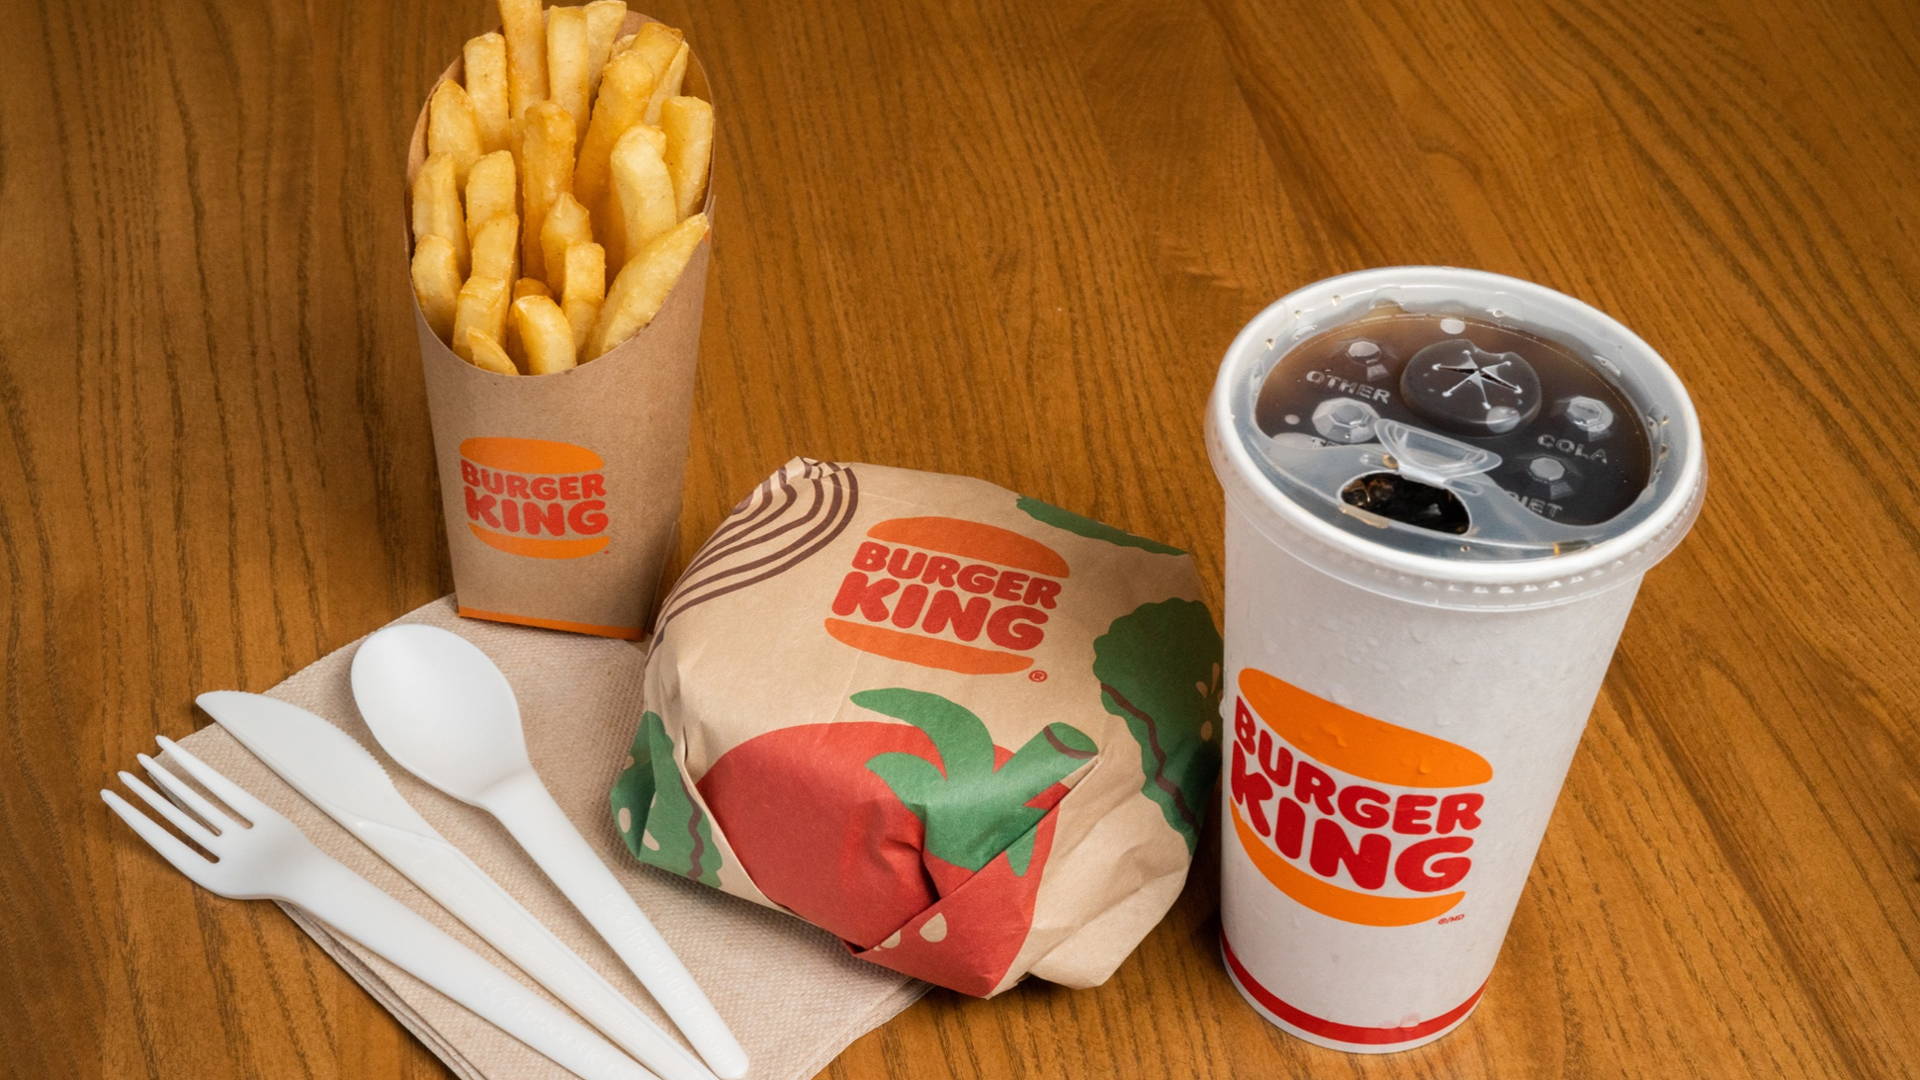 Featured image for Burger King Announces Sustainable Packaging Pilot, Expansion Of Reusable Container Program